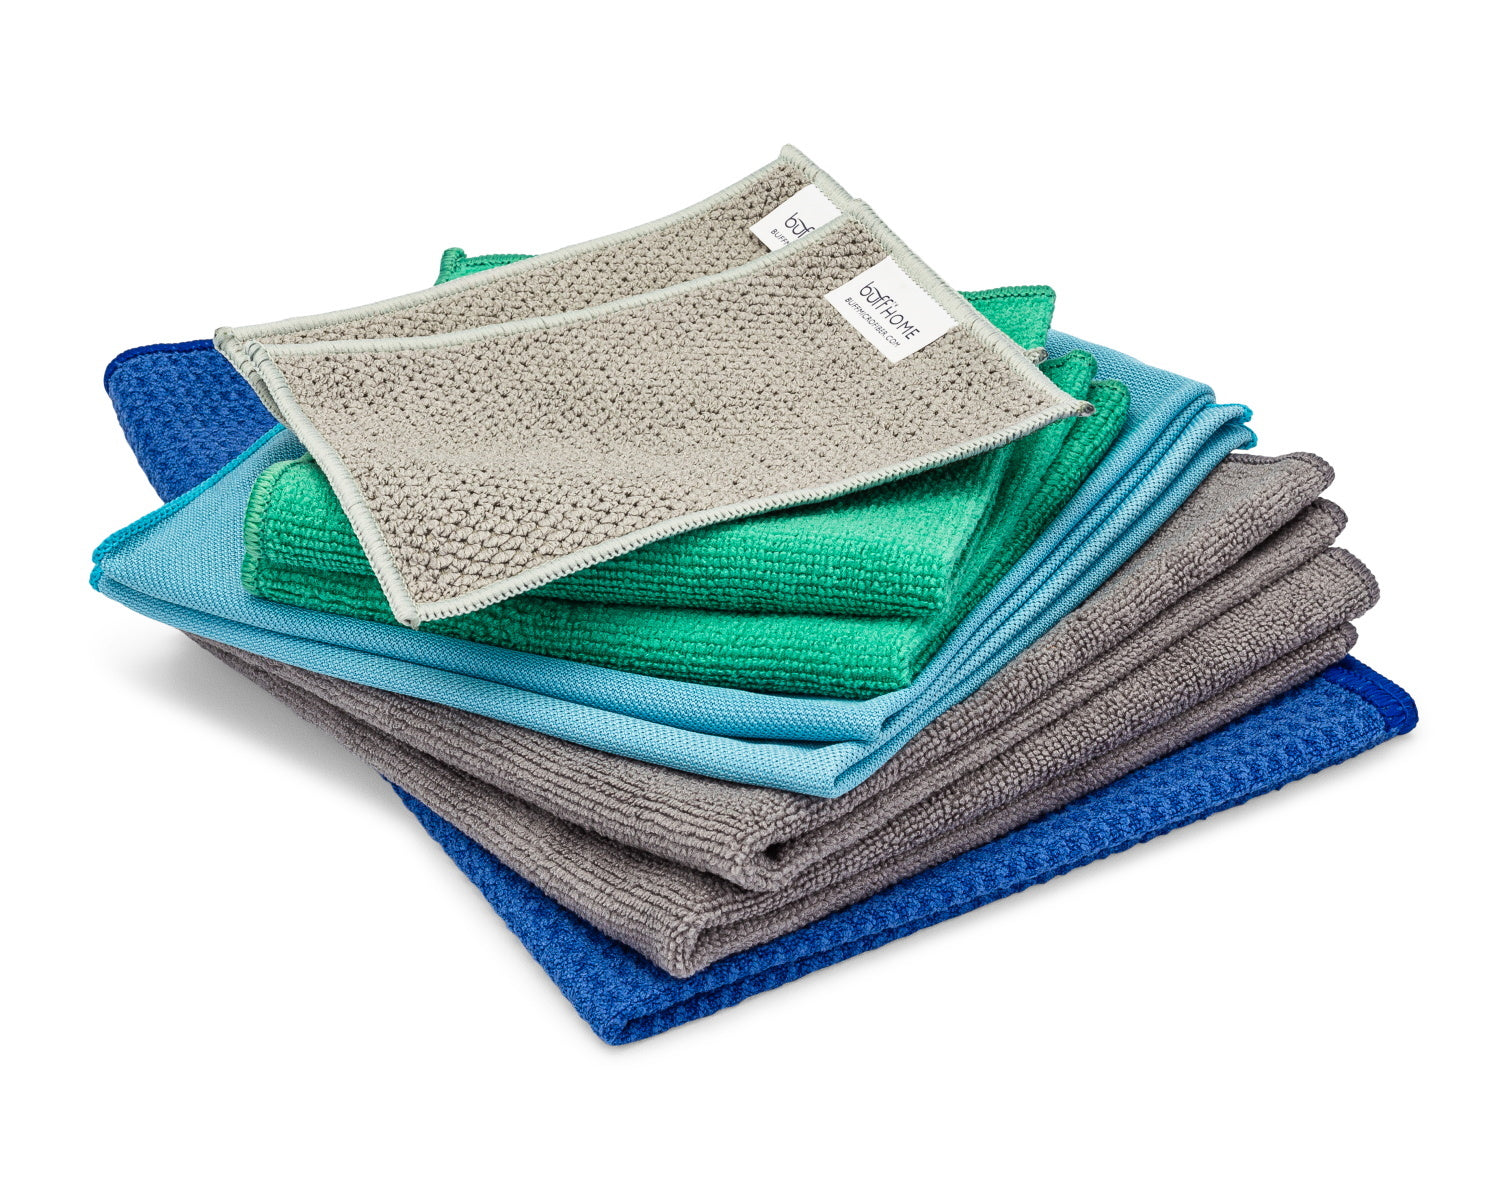 Terry Cloth vs Microfiber: What's the Difference? – Shine Armor